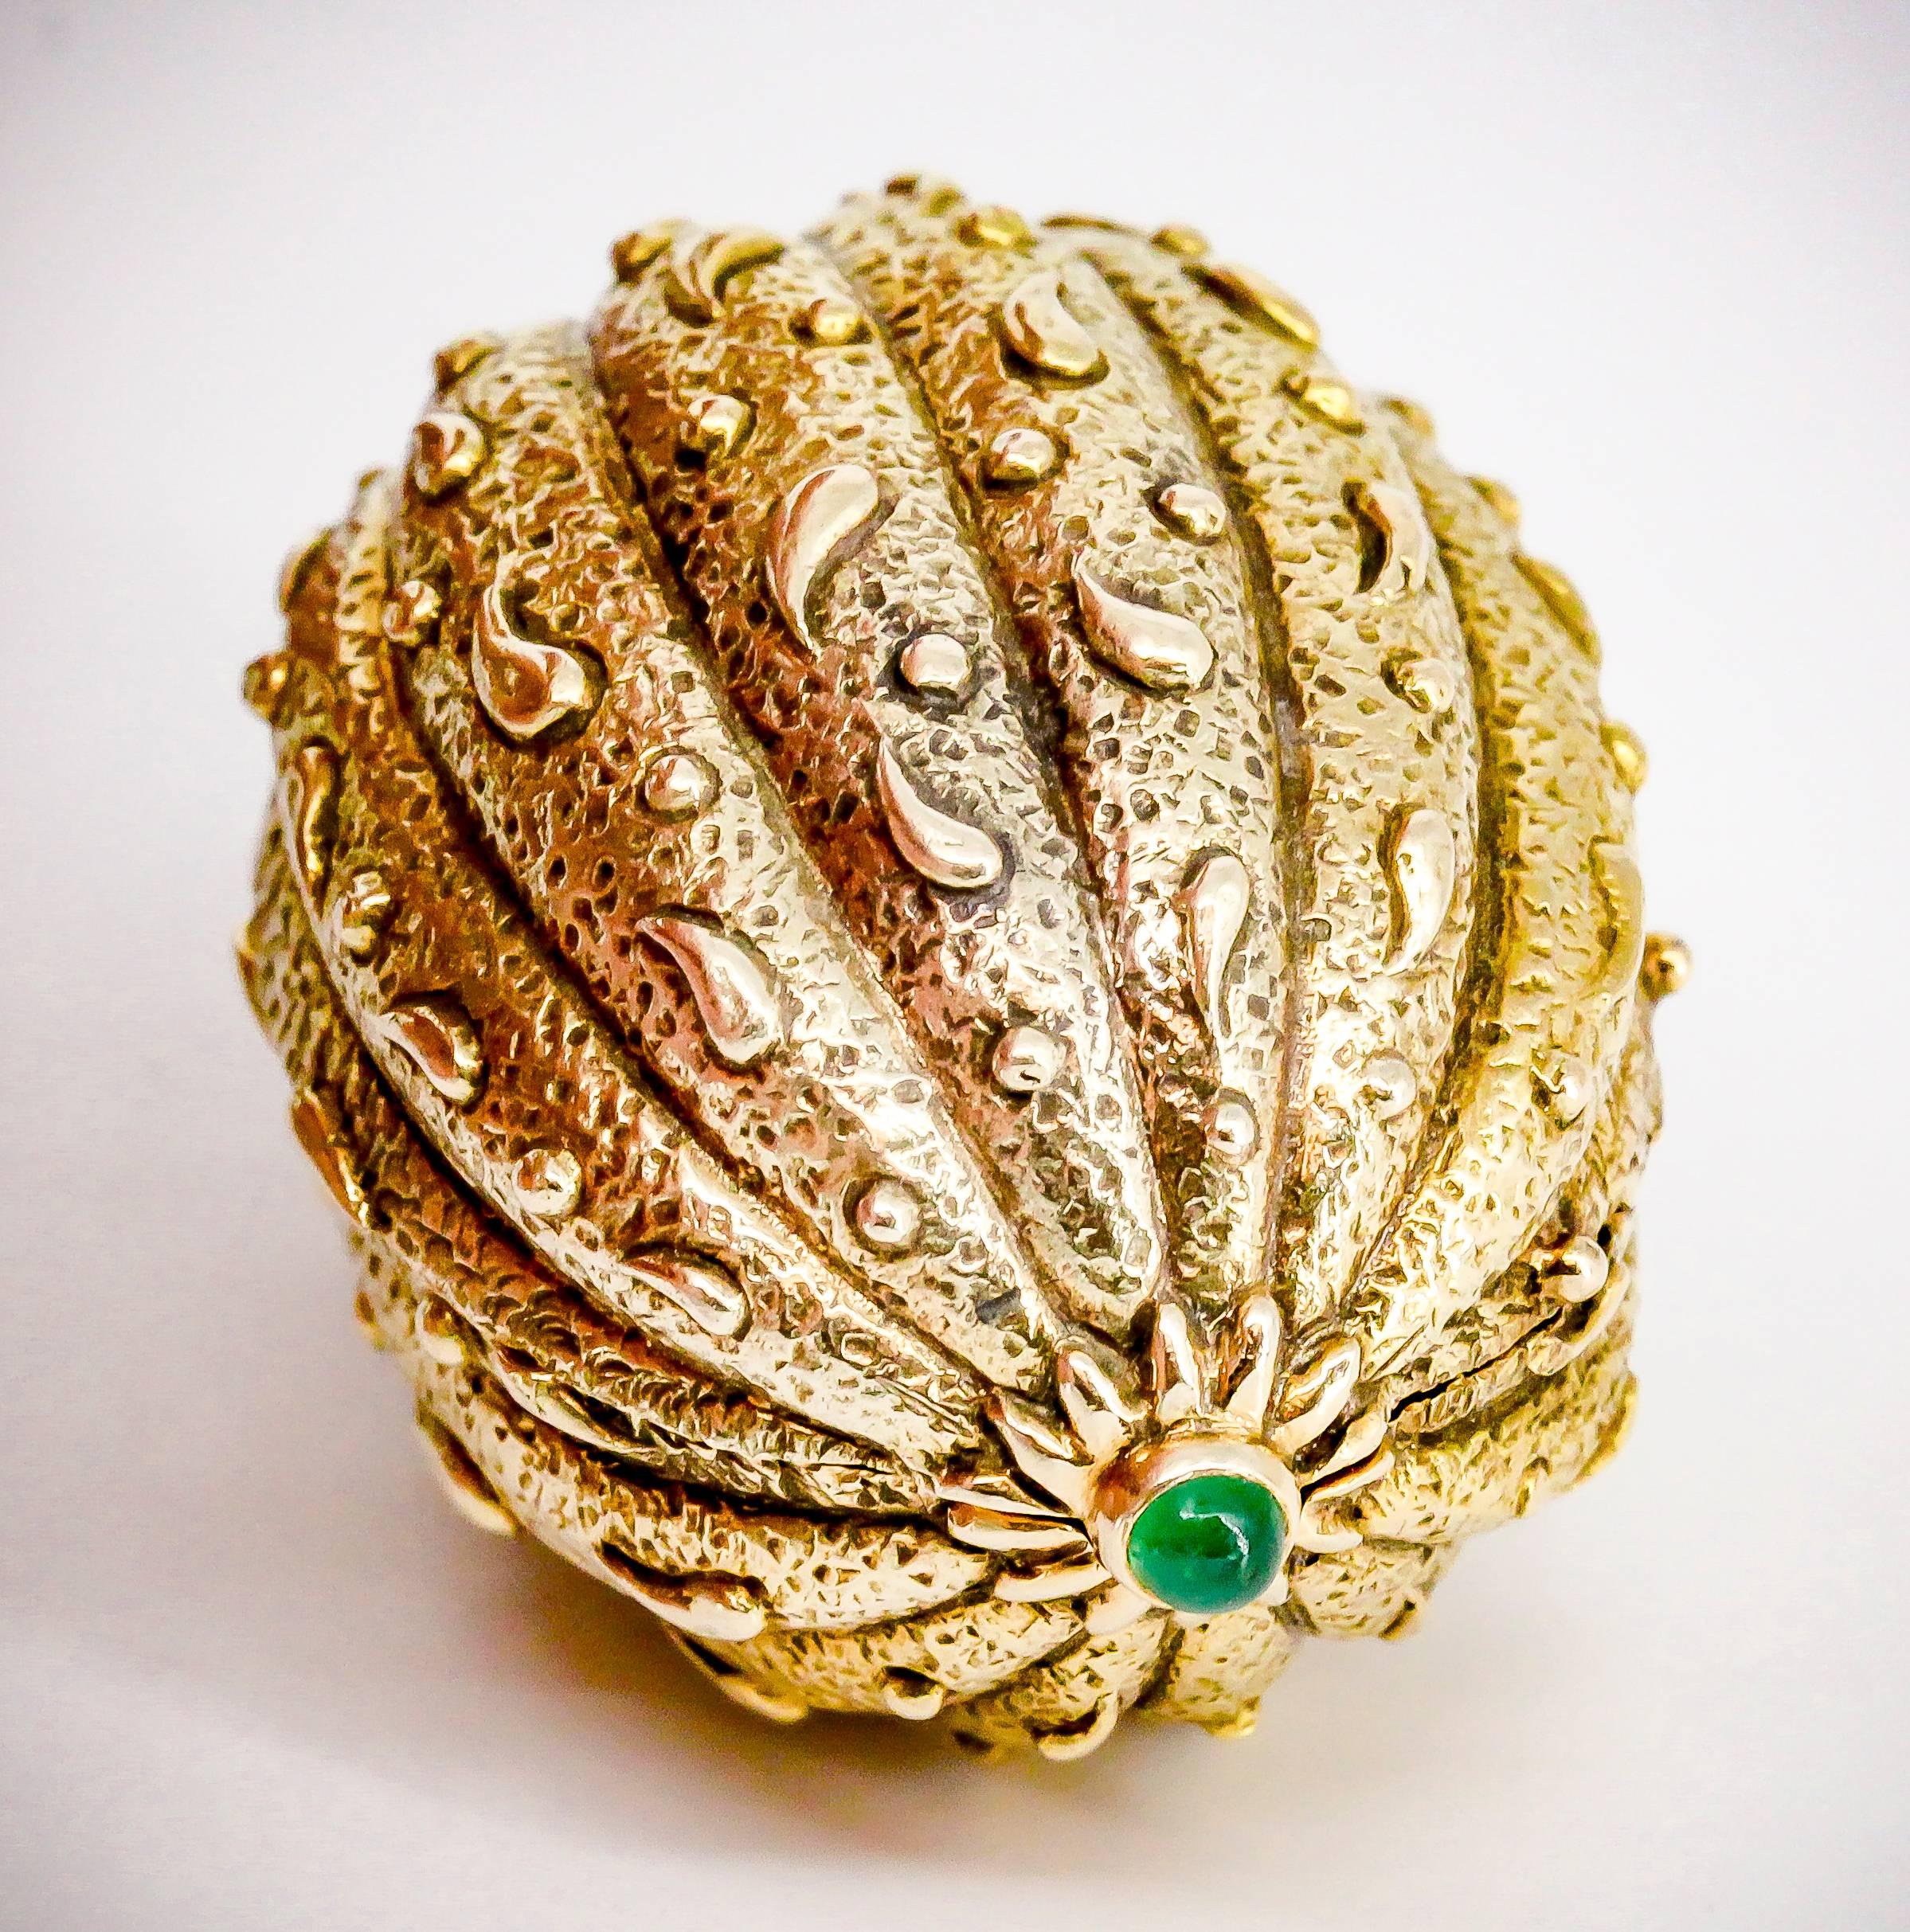 Rare emerald and 18K yellow gold pill box by Tiffany & Co. Schlumberger. It resembles a walnut, with beautifully intricate gold work, a flat base so doesn't roll away, and two rich green cabochon emeralds at each end. Beautifully made and easy